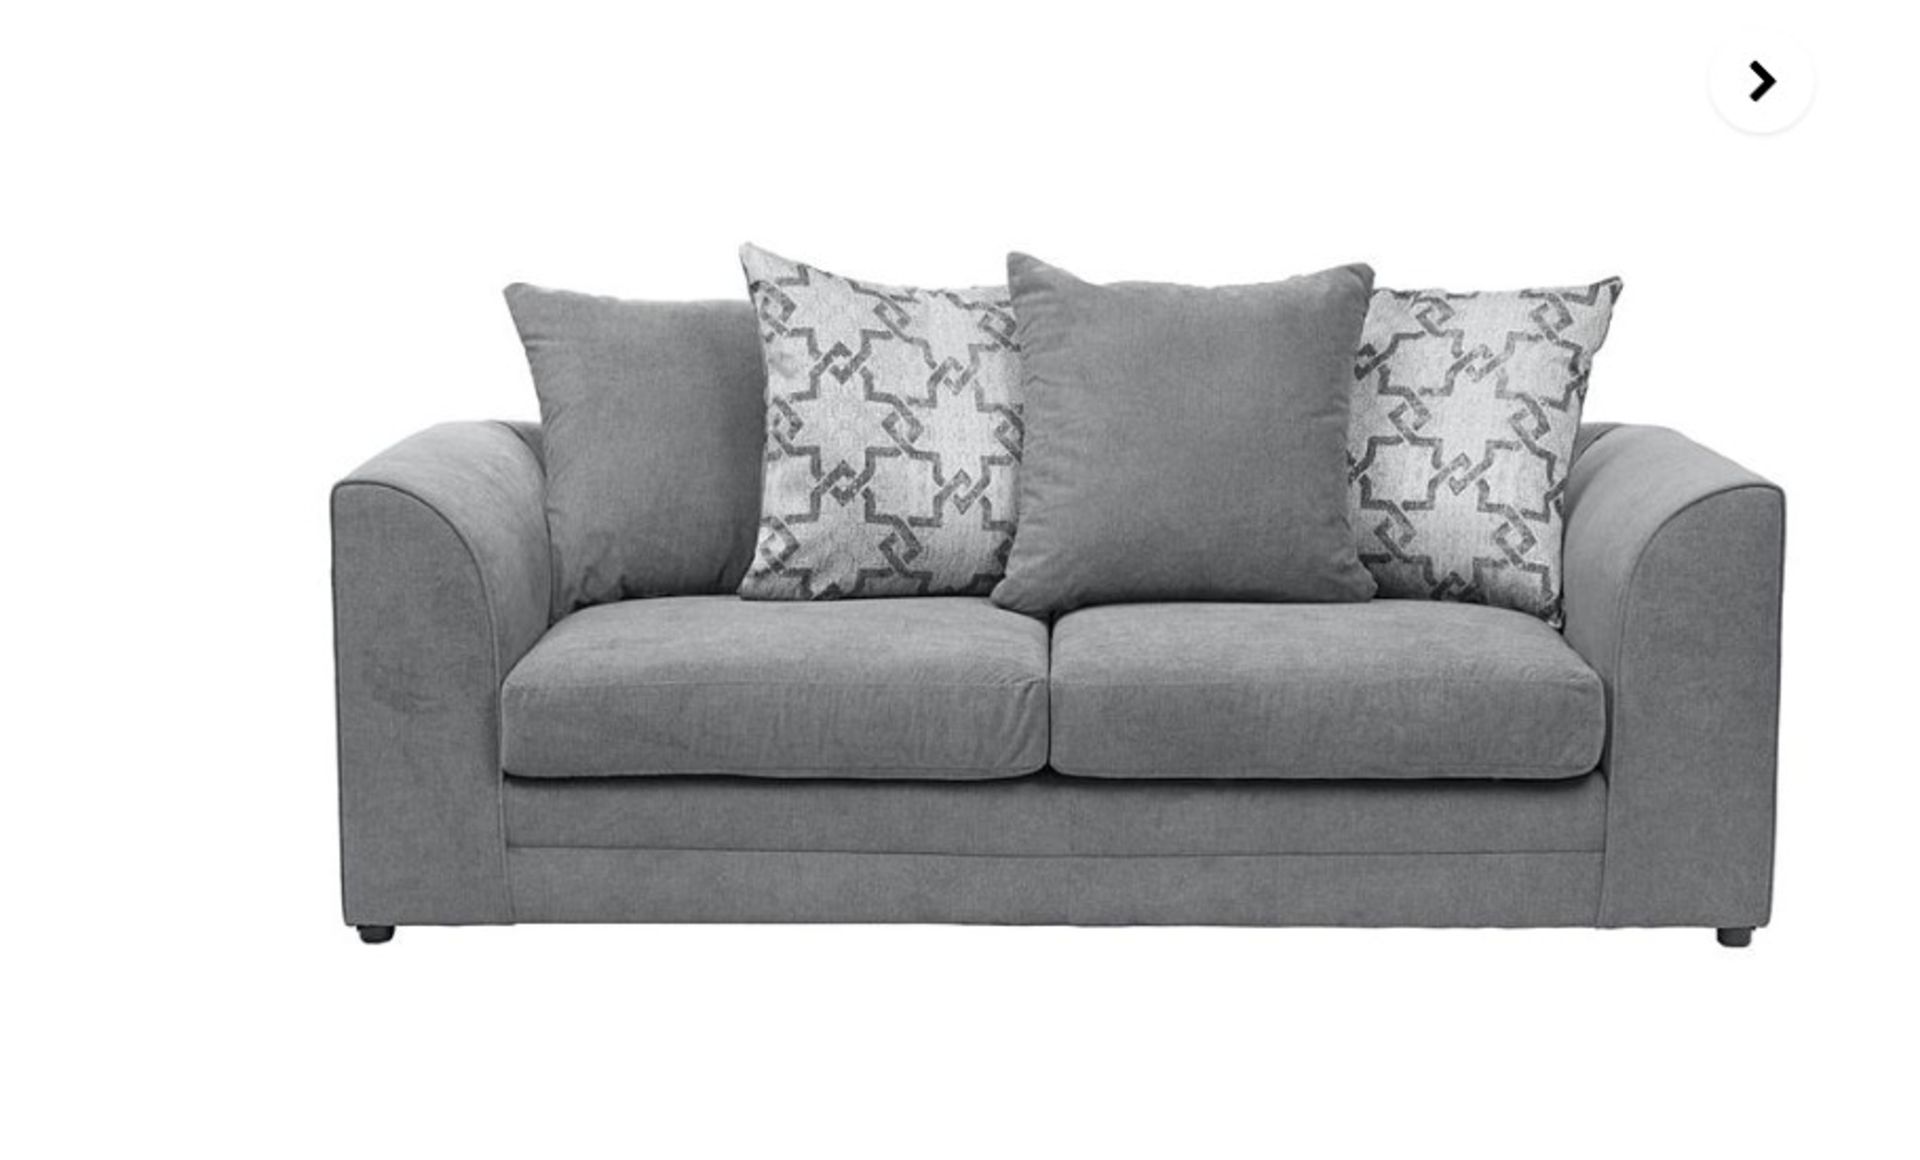 Grace 3 Seater Sofa. - ER23. RRP £639.00. This Grace 3 Seater Sofa is perfect for those after a